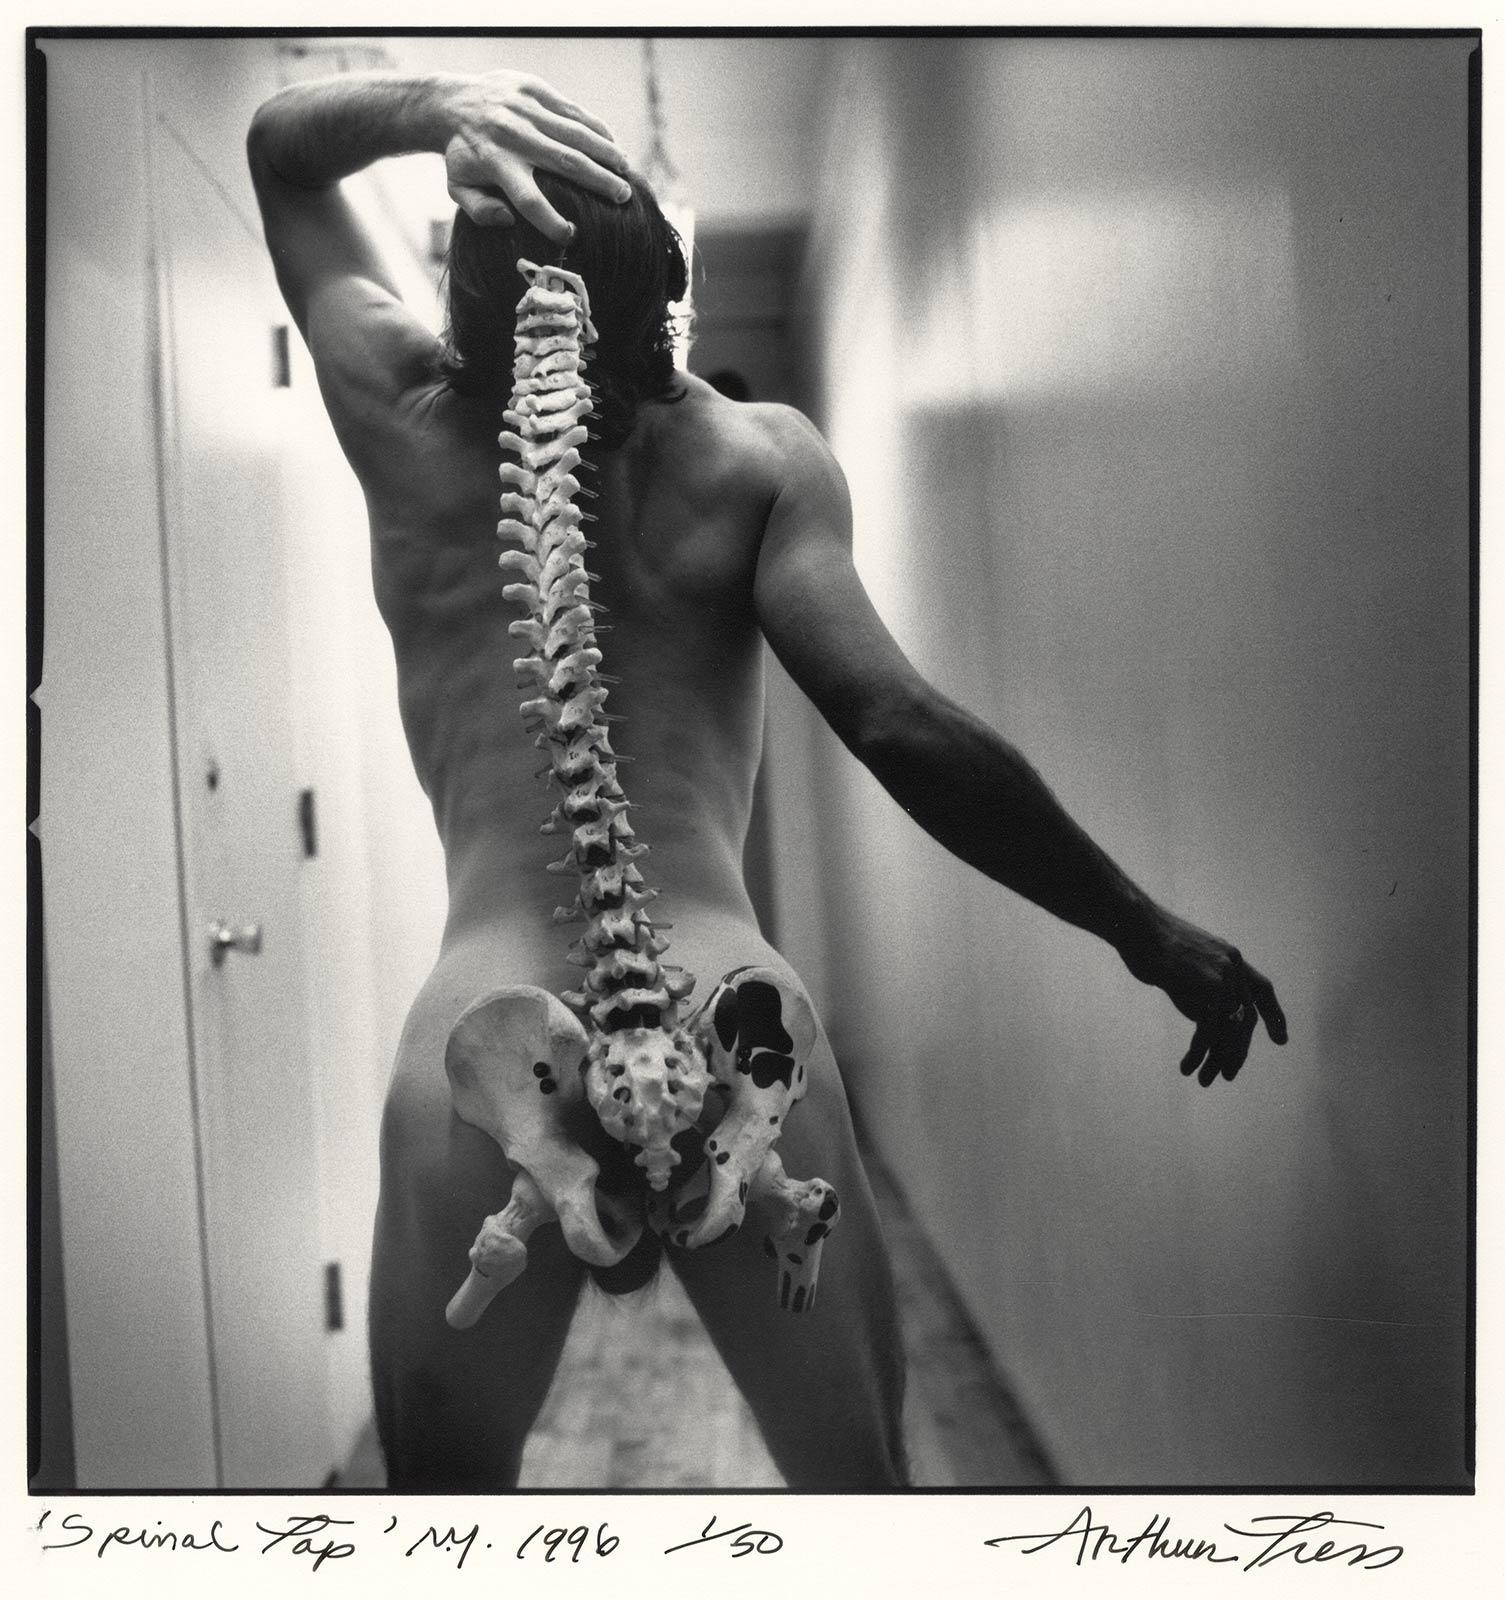 Spinal Tap (nude male standing with skeleton of actual spinal column) - Contemporary Photograph by Arthur Tress